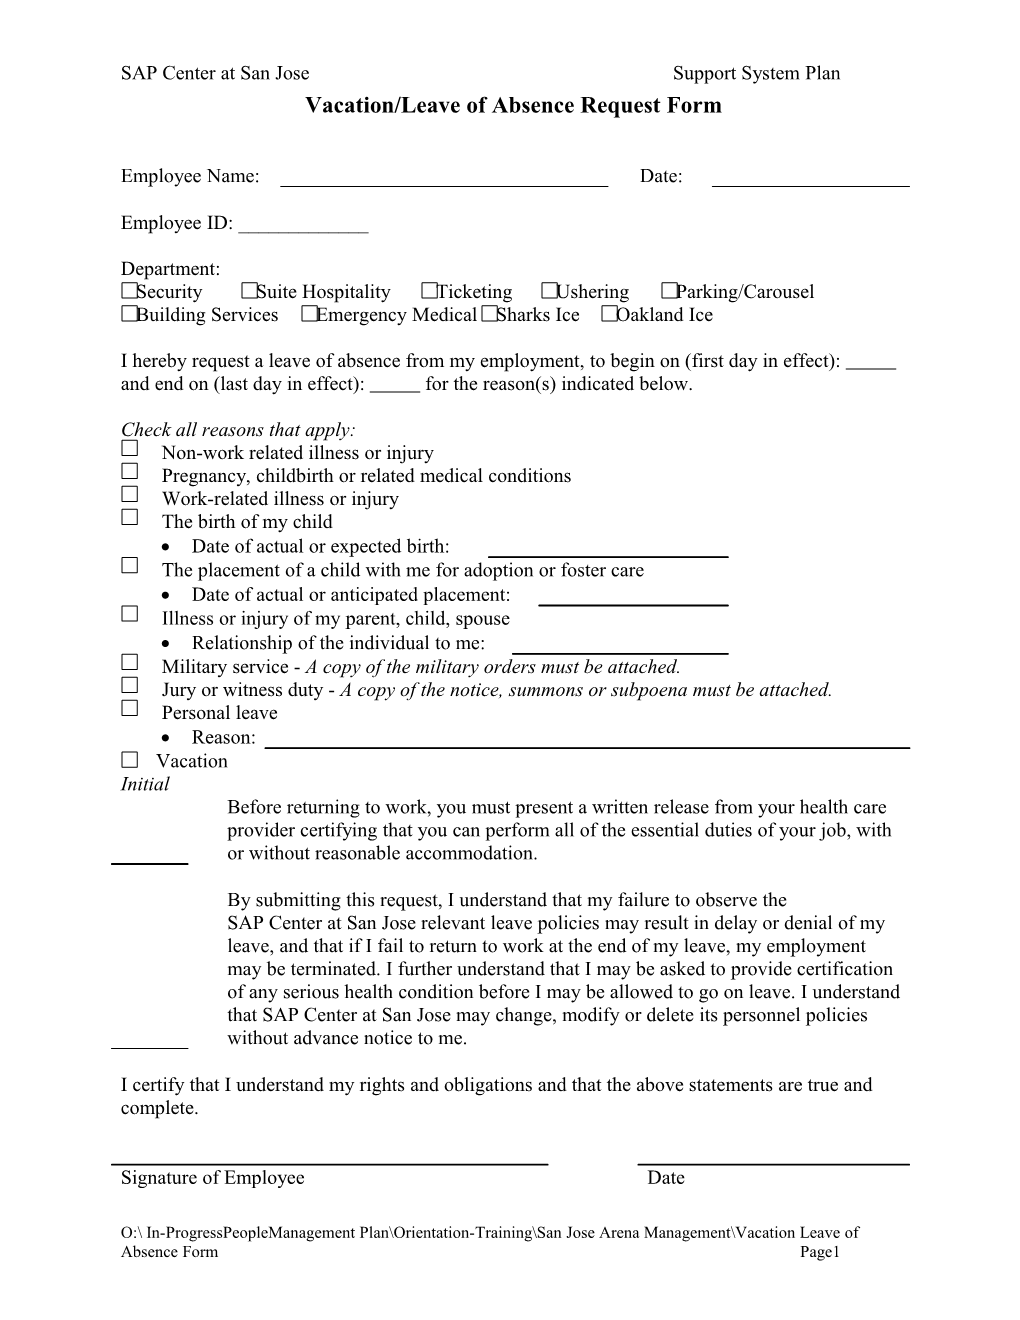 Request for Leave of Absence.PDF